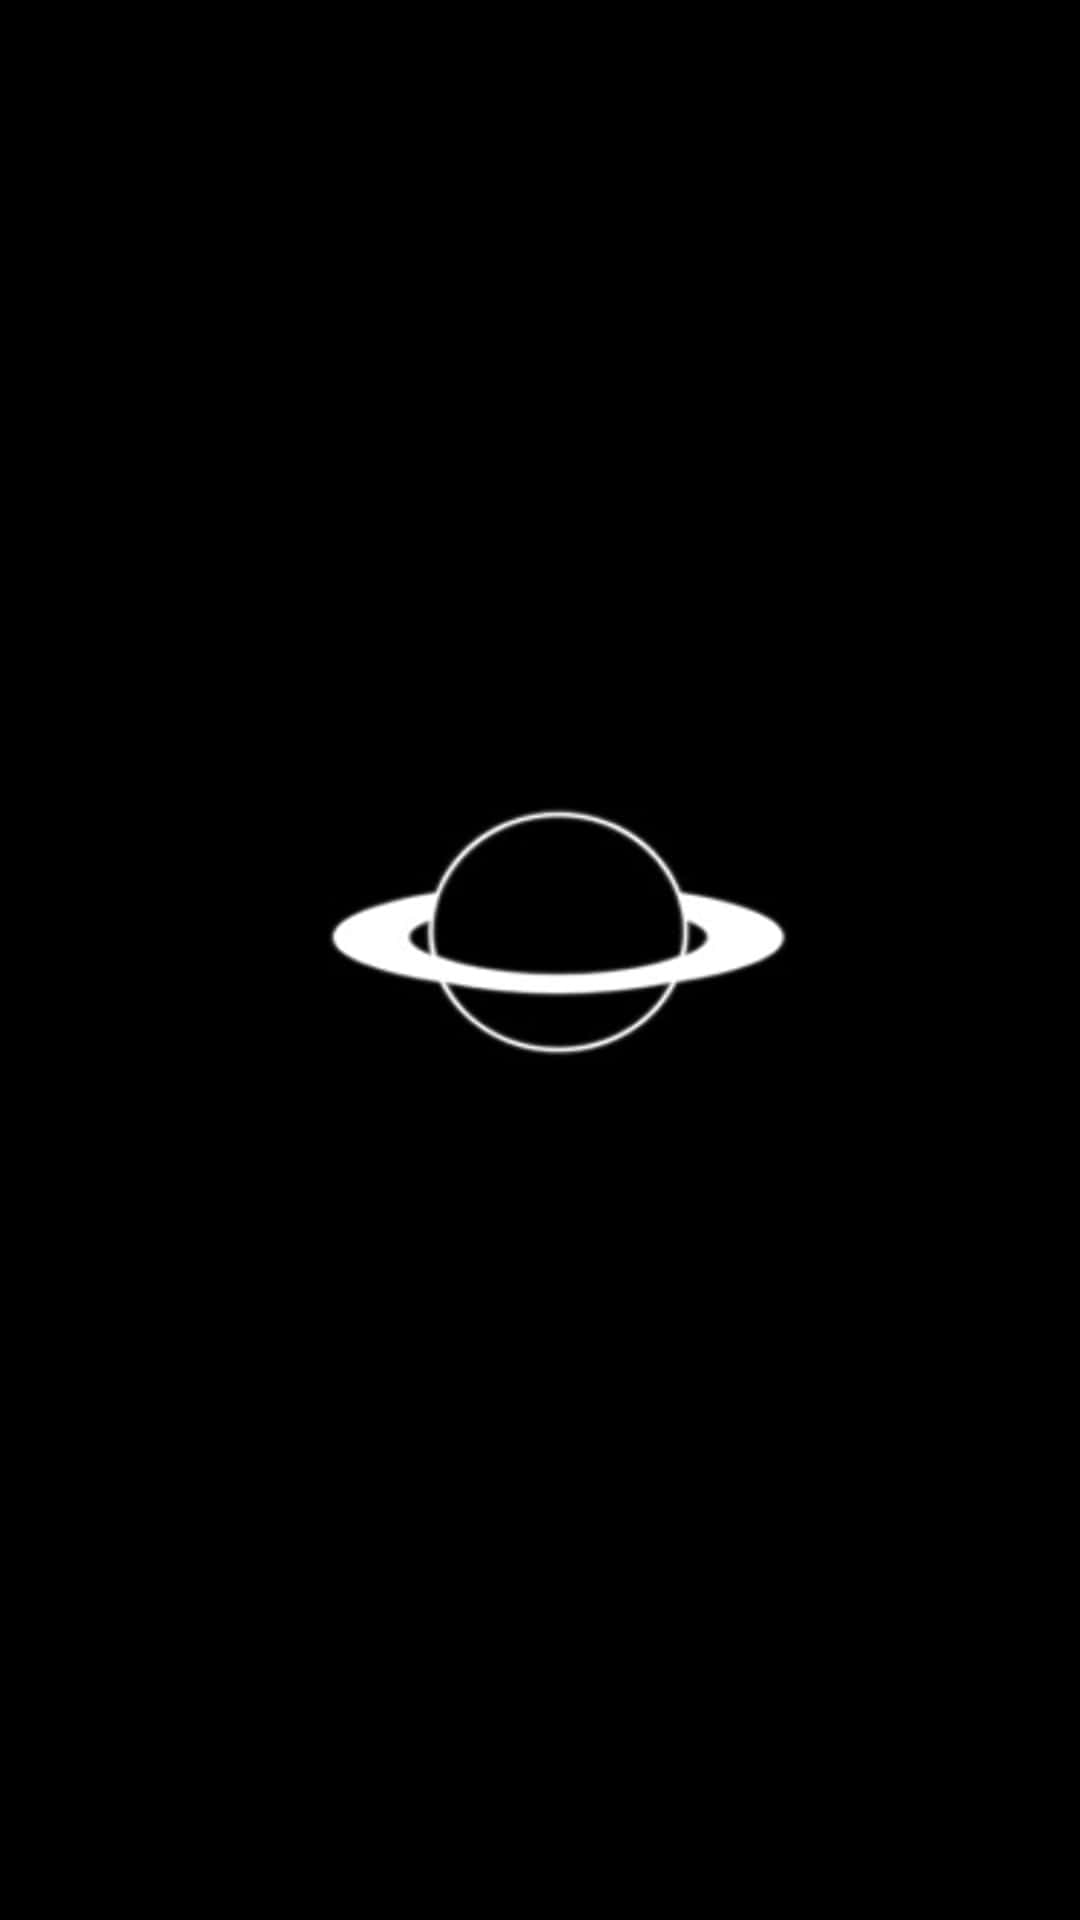 Download Planet Saturn Black And White Aesthetic Phone Wallpaper